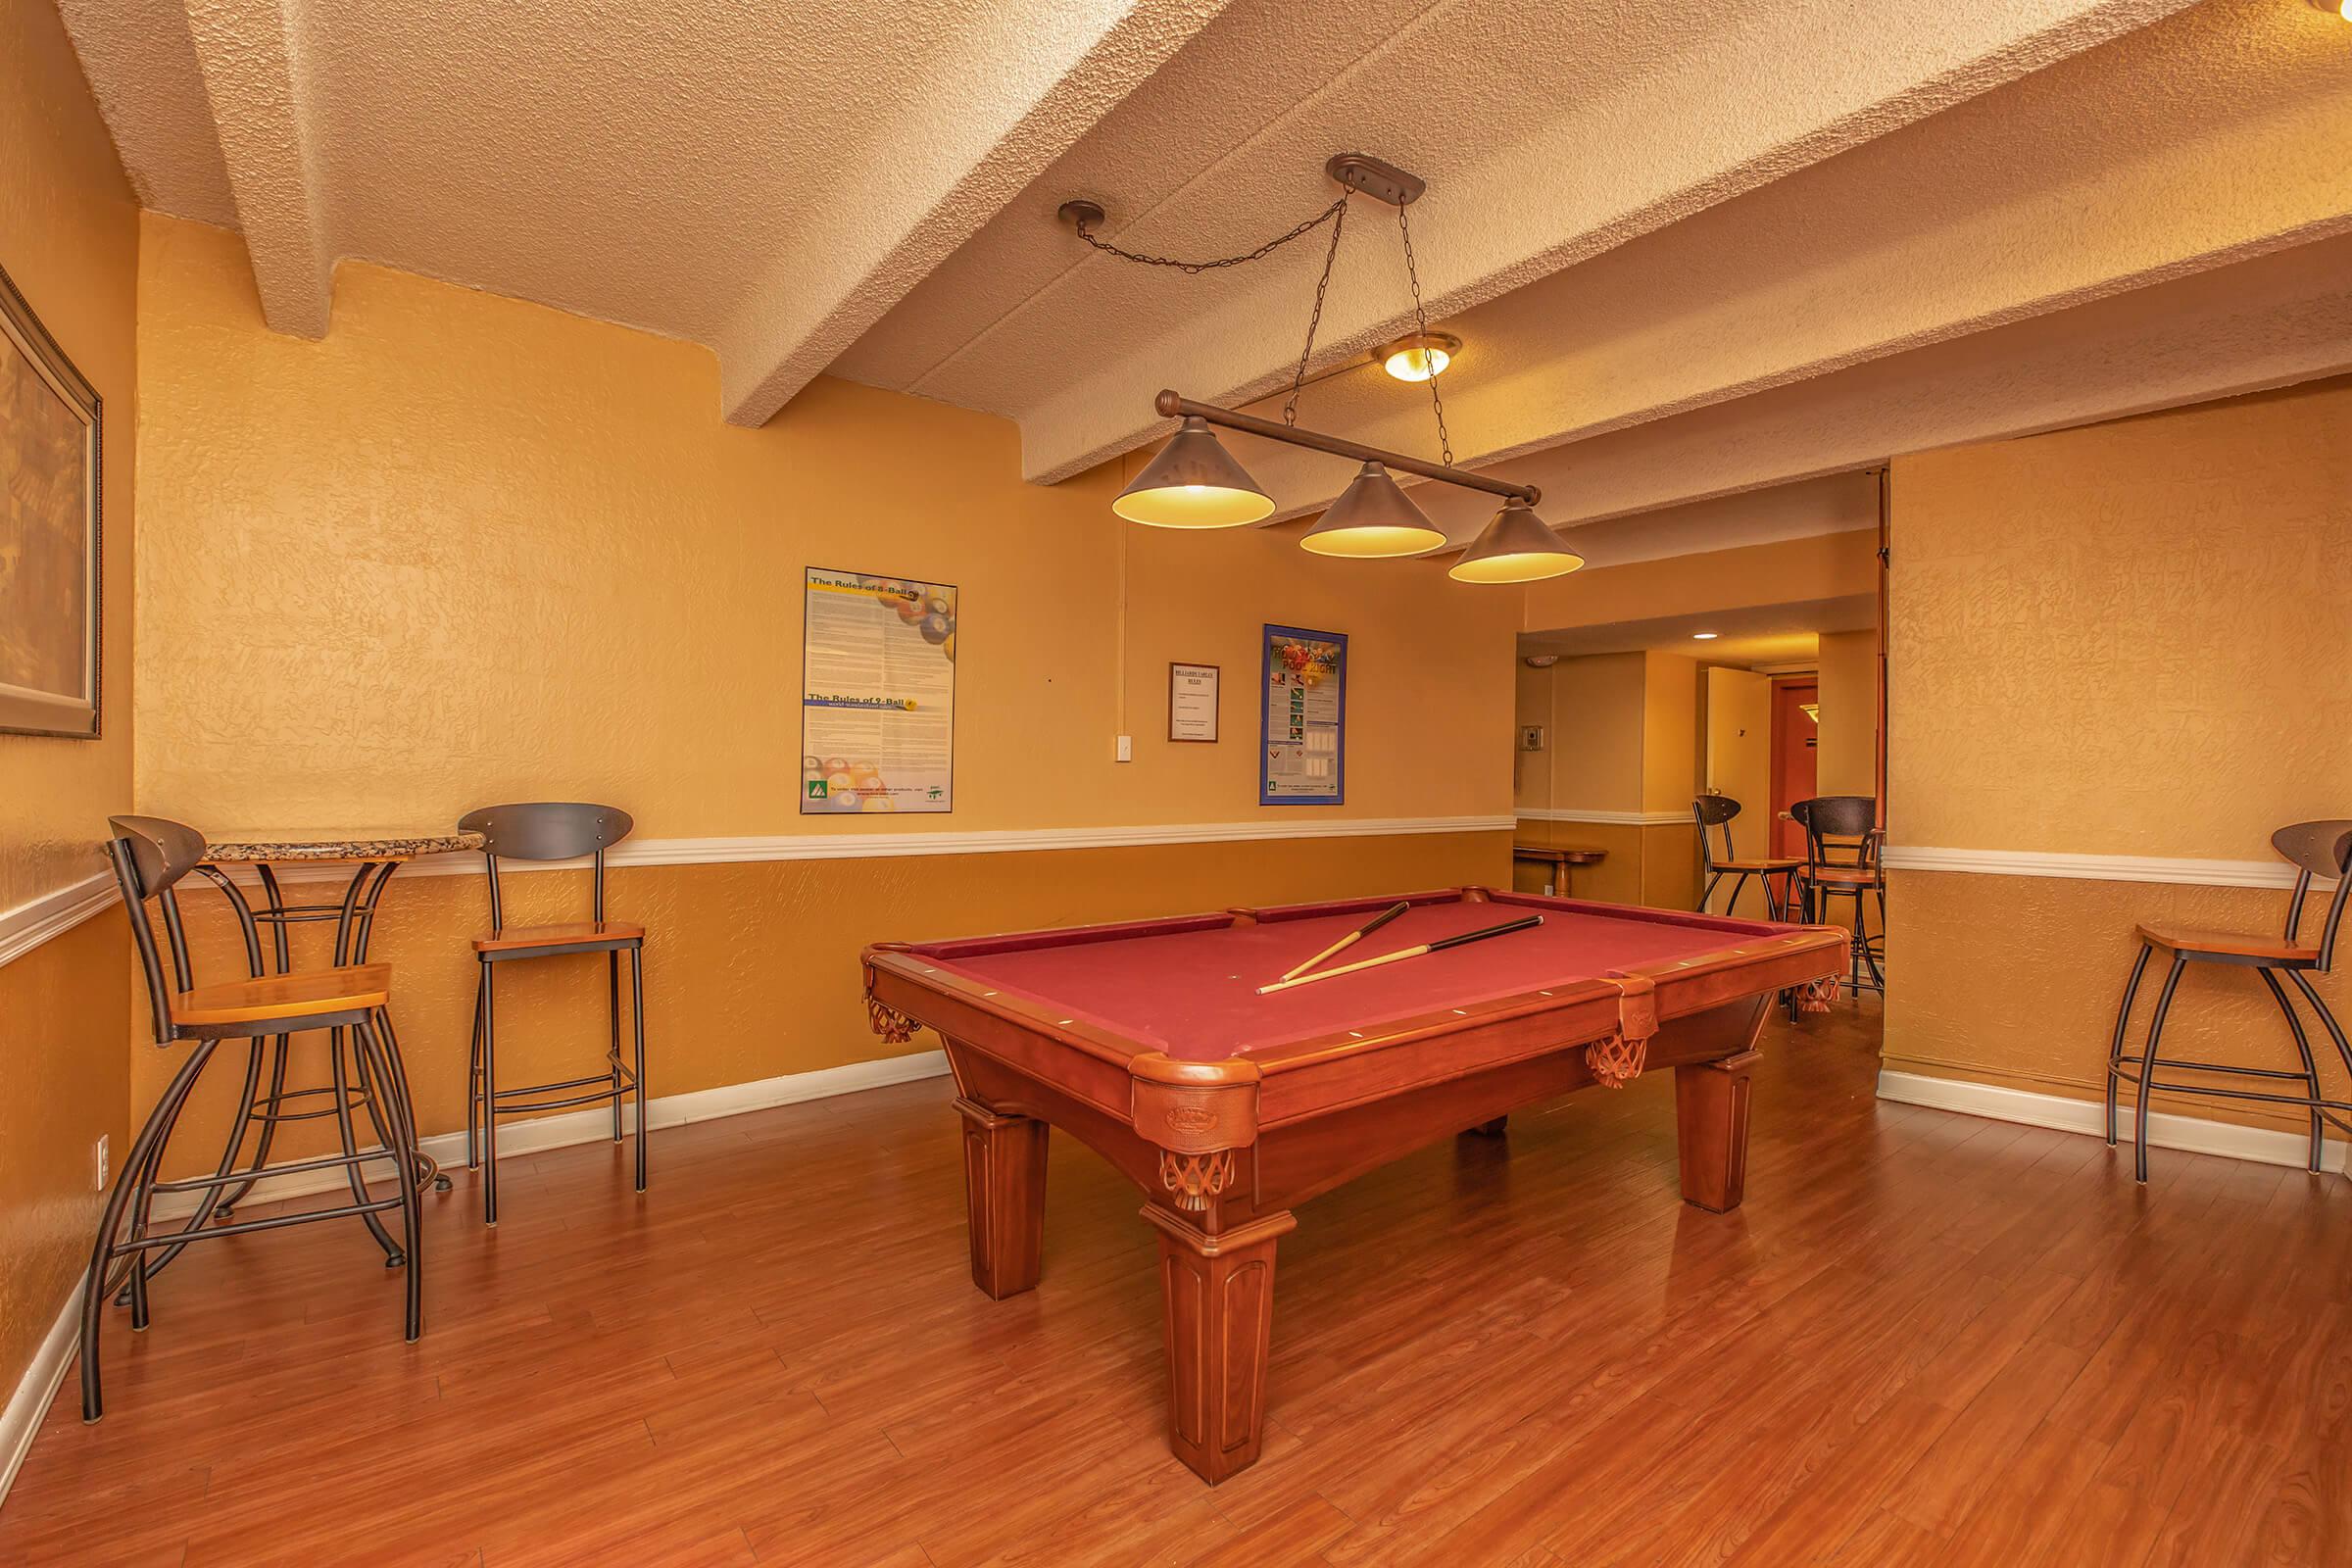 a pool table in the community room with wooden floors